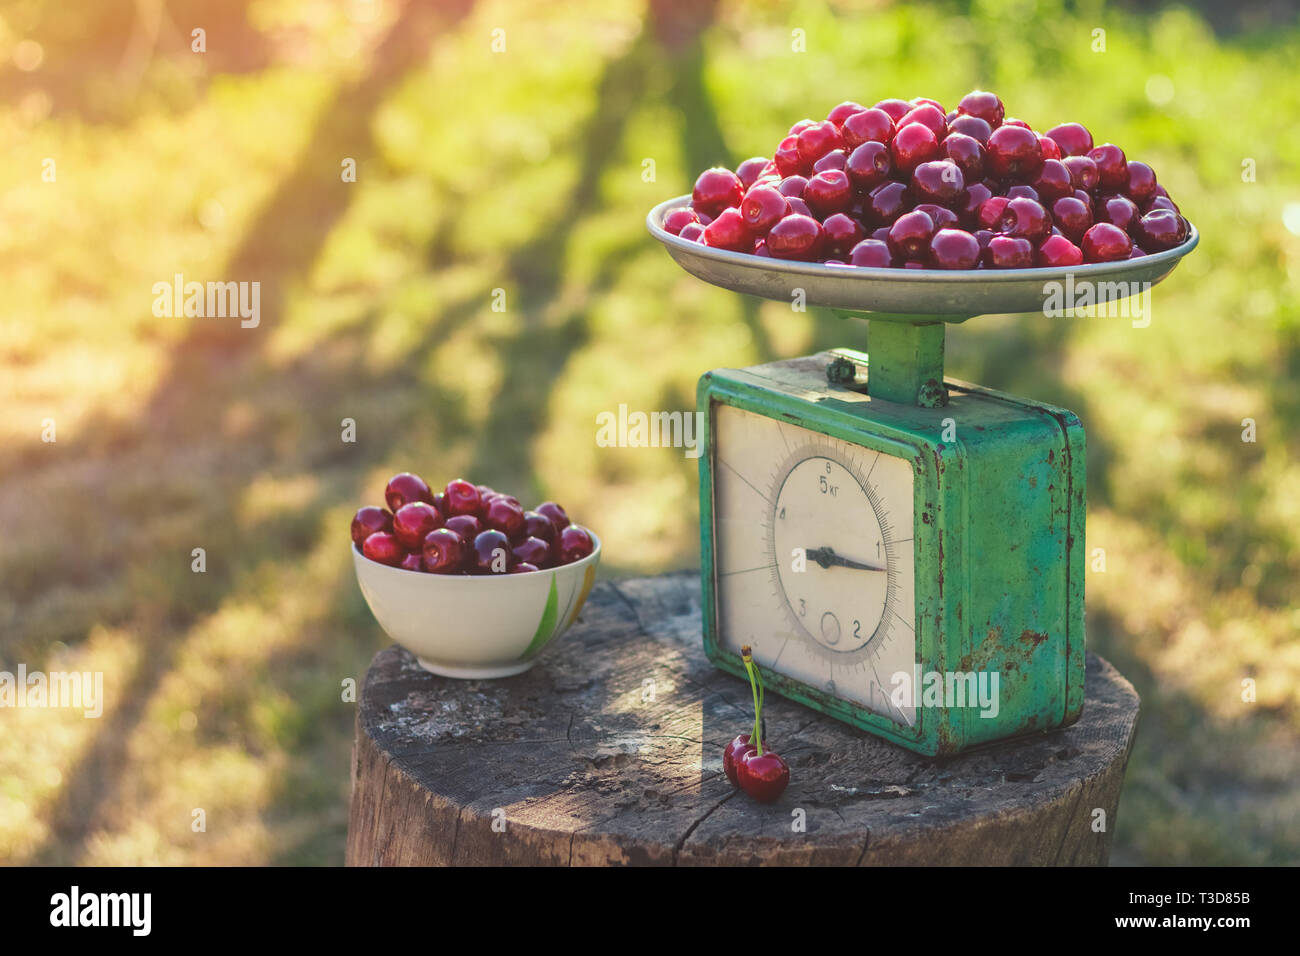 Vintage ripe sweet cherry on scales in the garden Stock Photo